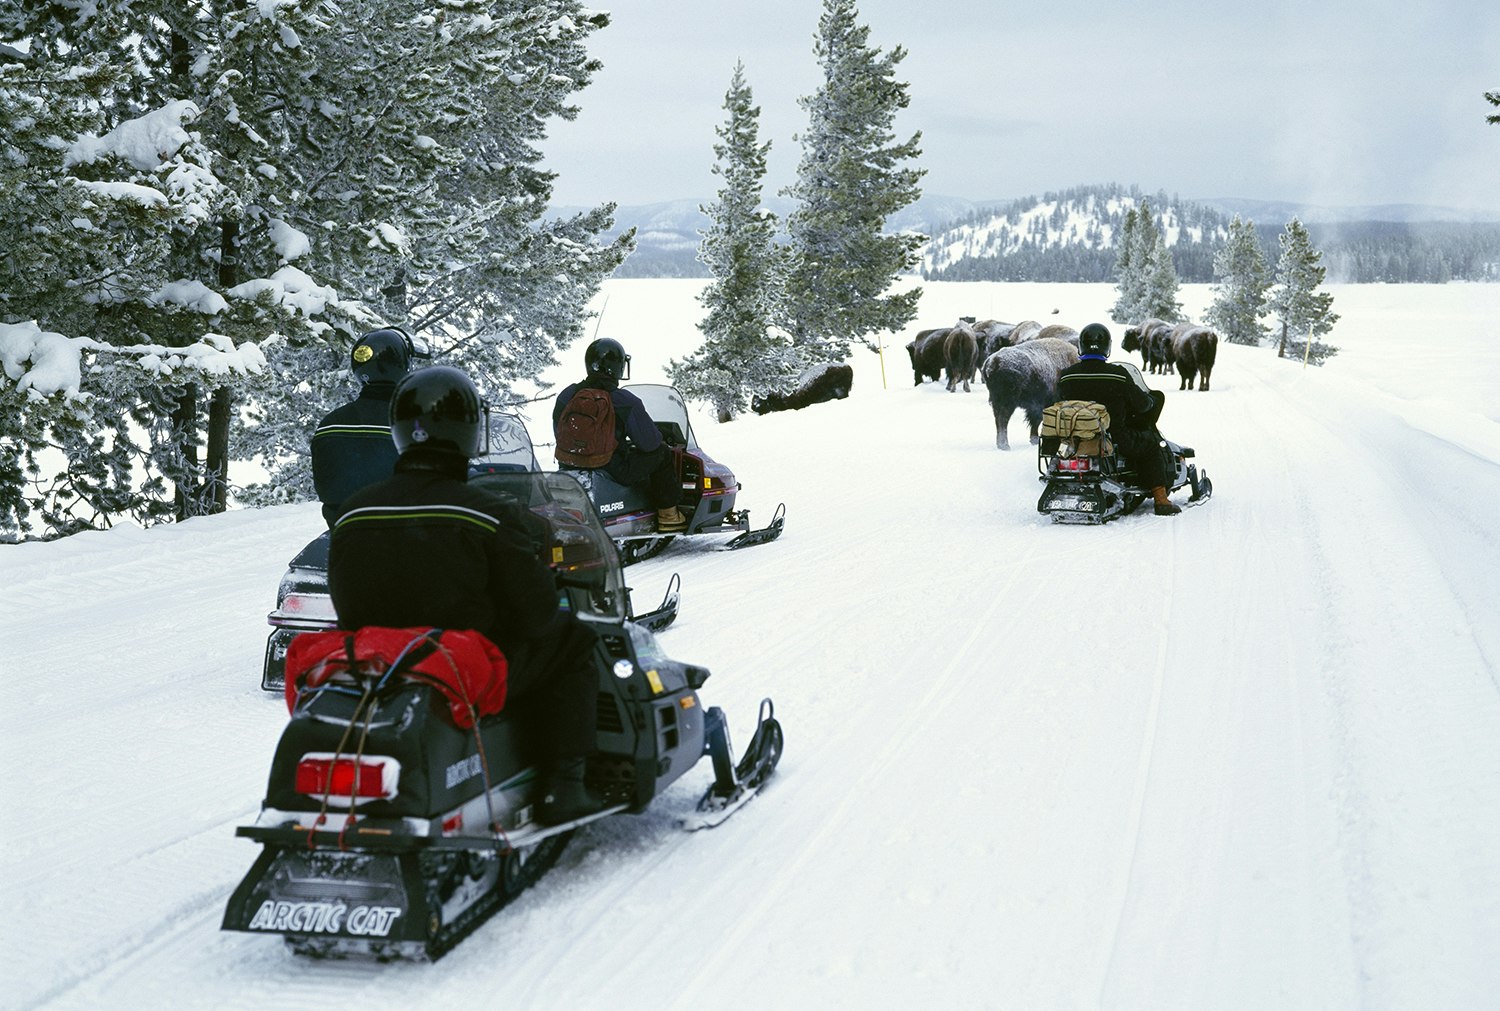 Winter magic: steer a snowmobile among bison herds during the cold months in Yellowstone National Park © Jeff Foott / Getty Images